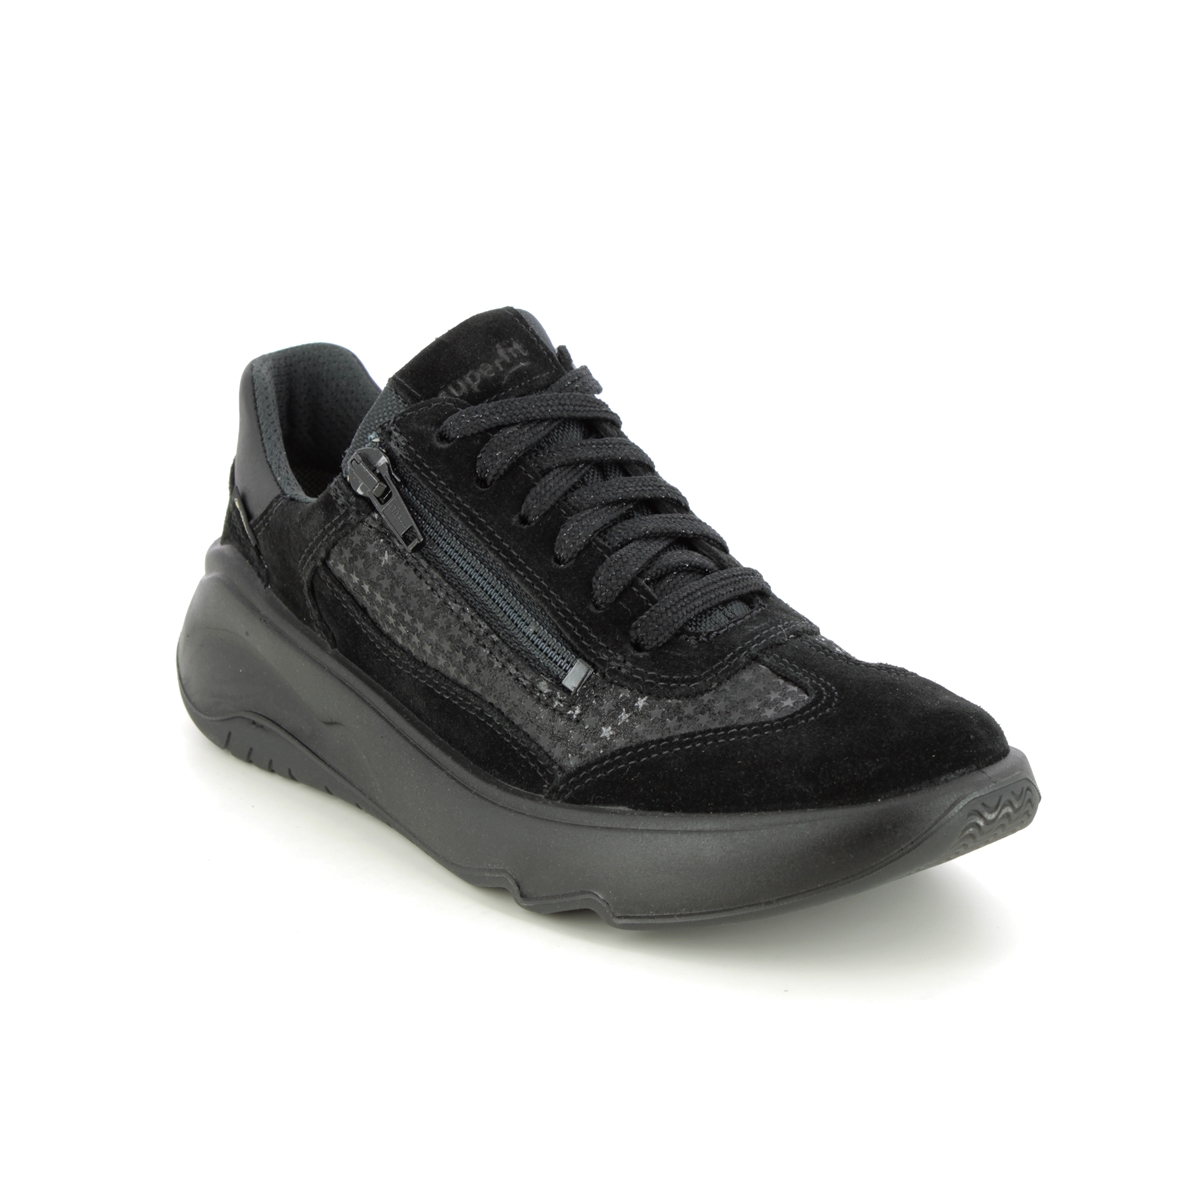 Superfit Melody Gtx Lace Black leather Kids girls trainers 1000633-0000 in a Plain Leather in Size 37